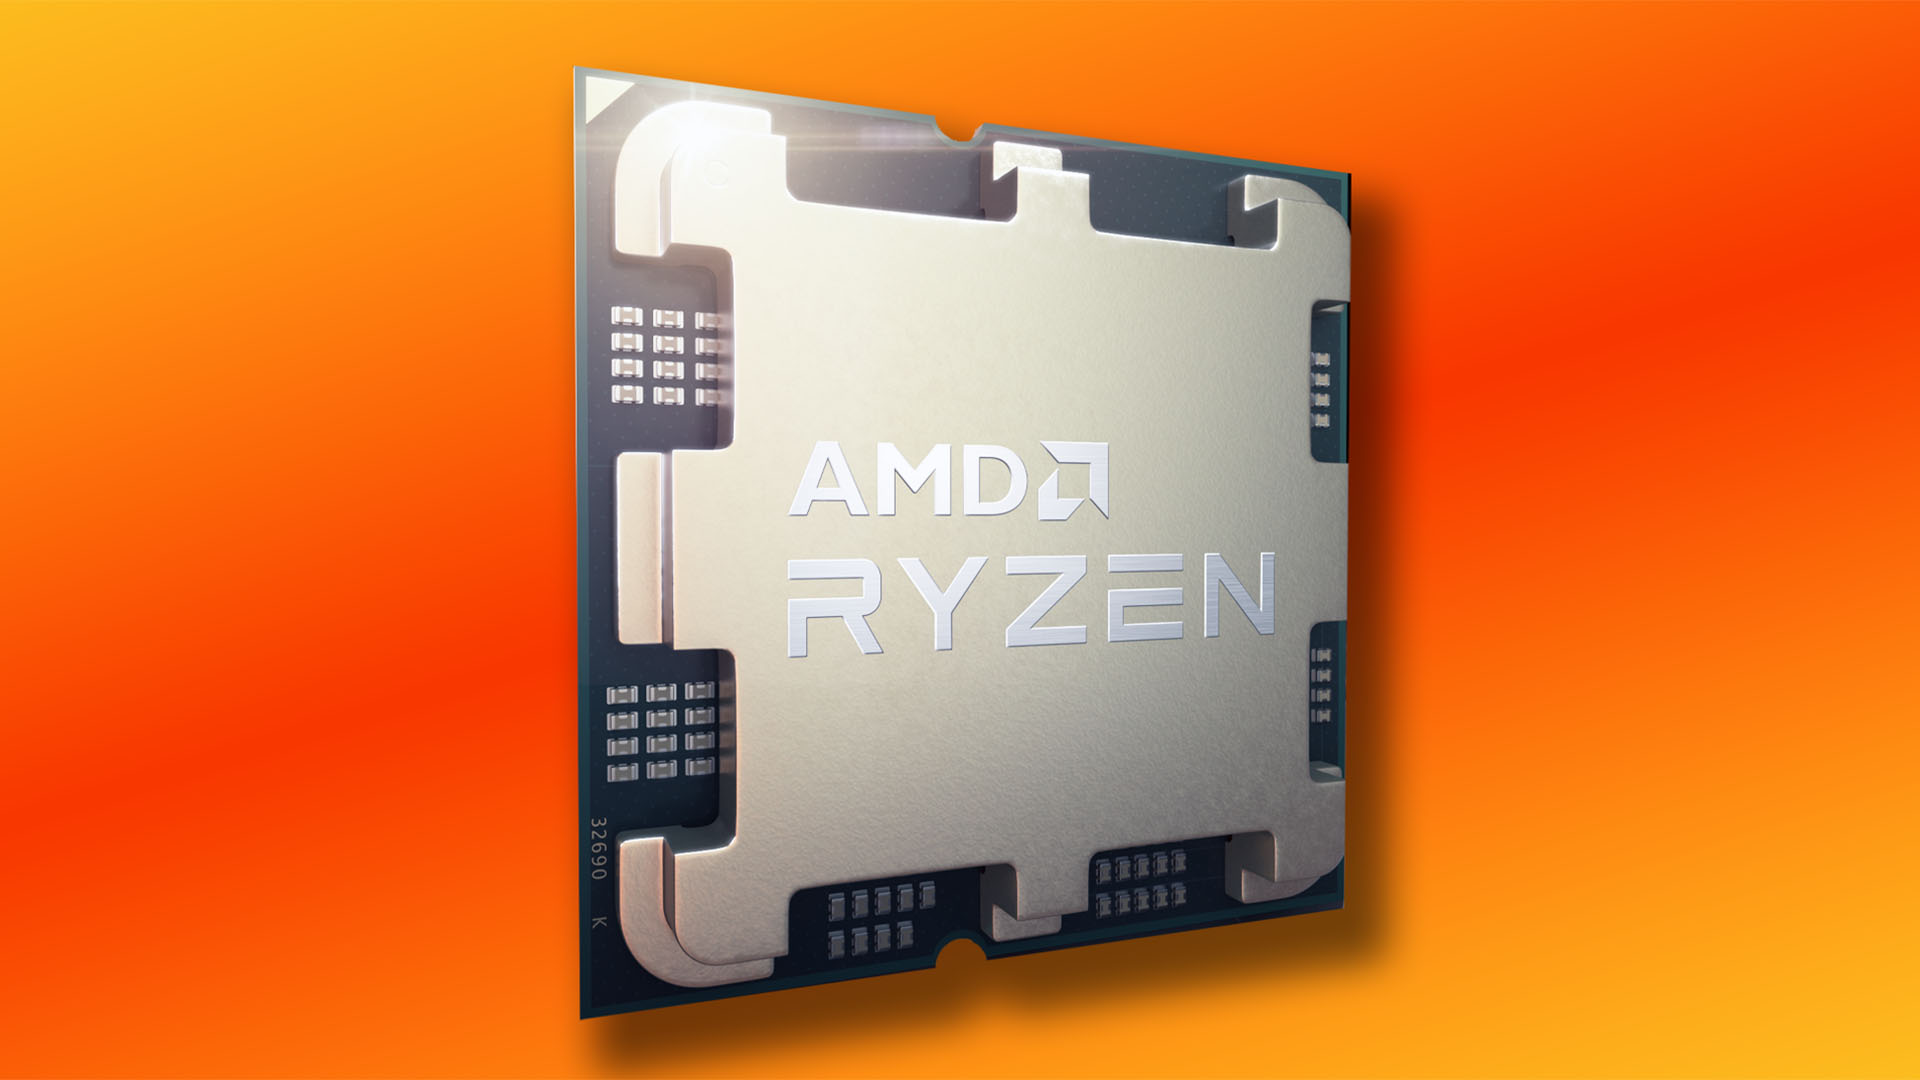 AMD's new Ryzen CPU name just leaked, and it's not what you expect